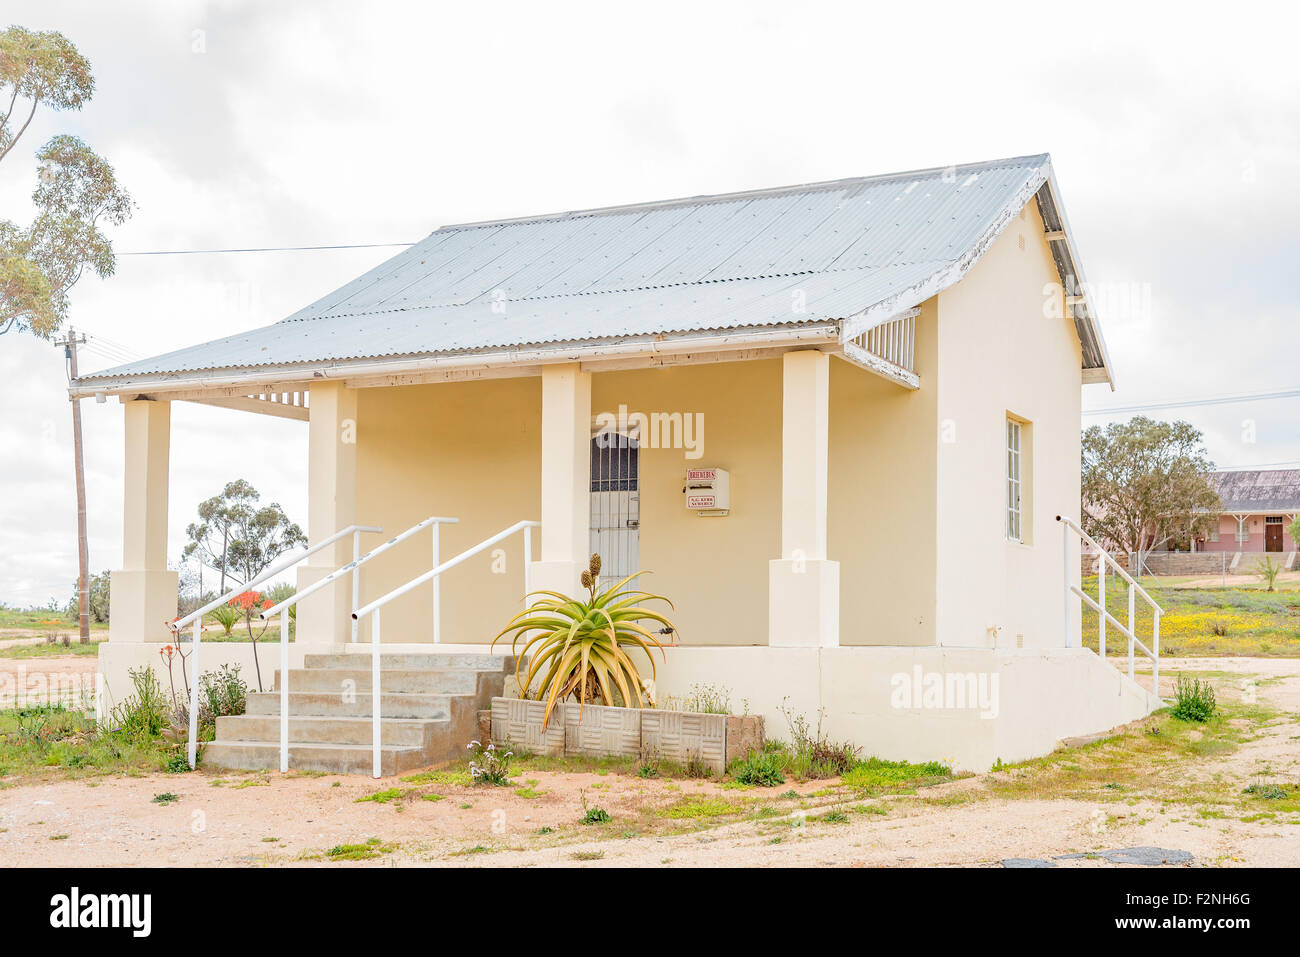 NUWERUS, SOUTH AFRICA - AUGUST 13, 2015: Offices of the Dutch Reformed Church in Nuwerus (new rest), a small town in the Western Stock Photo